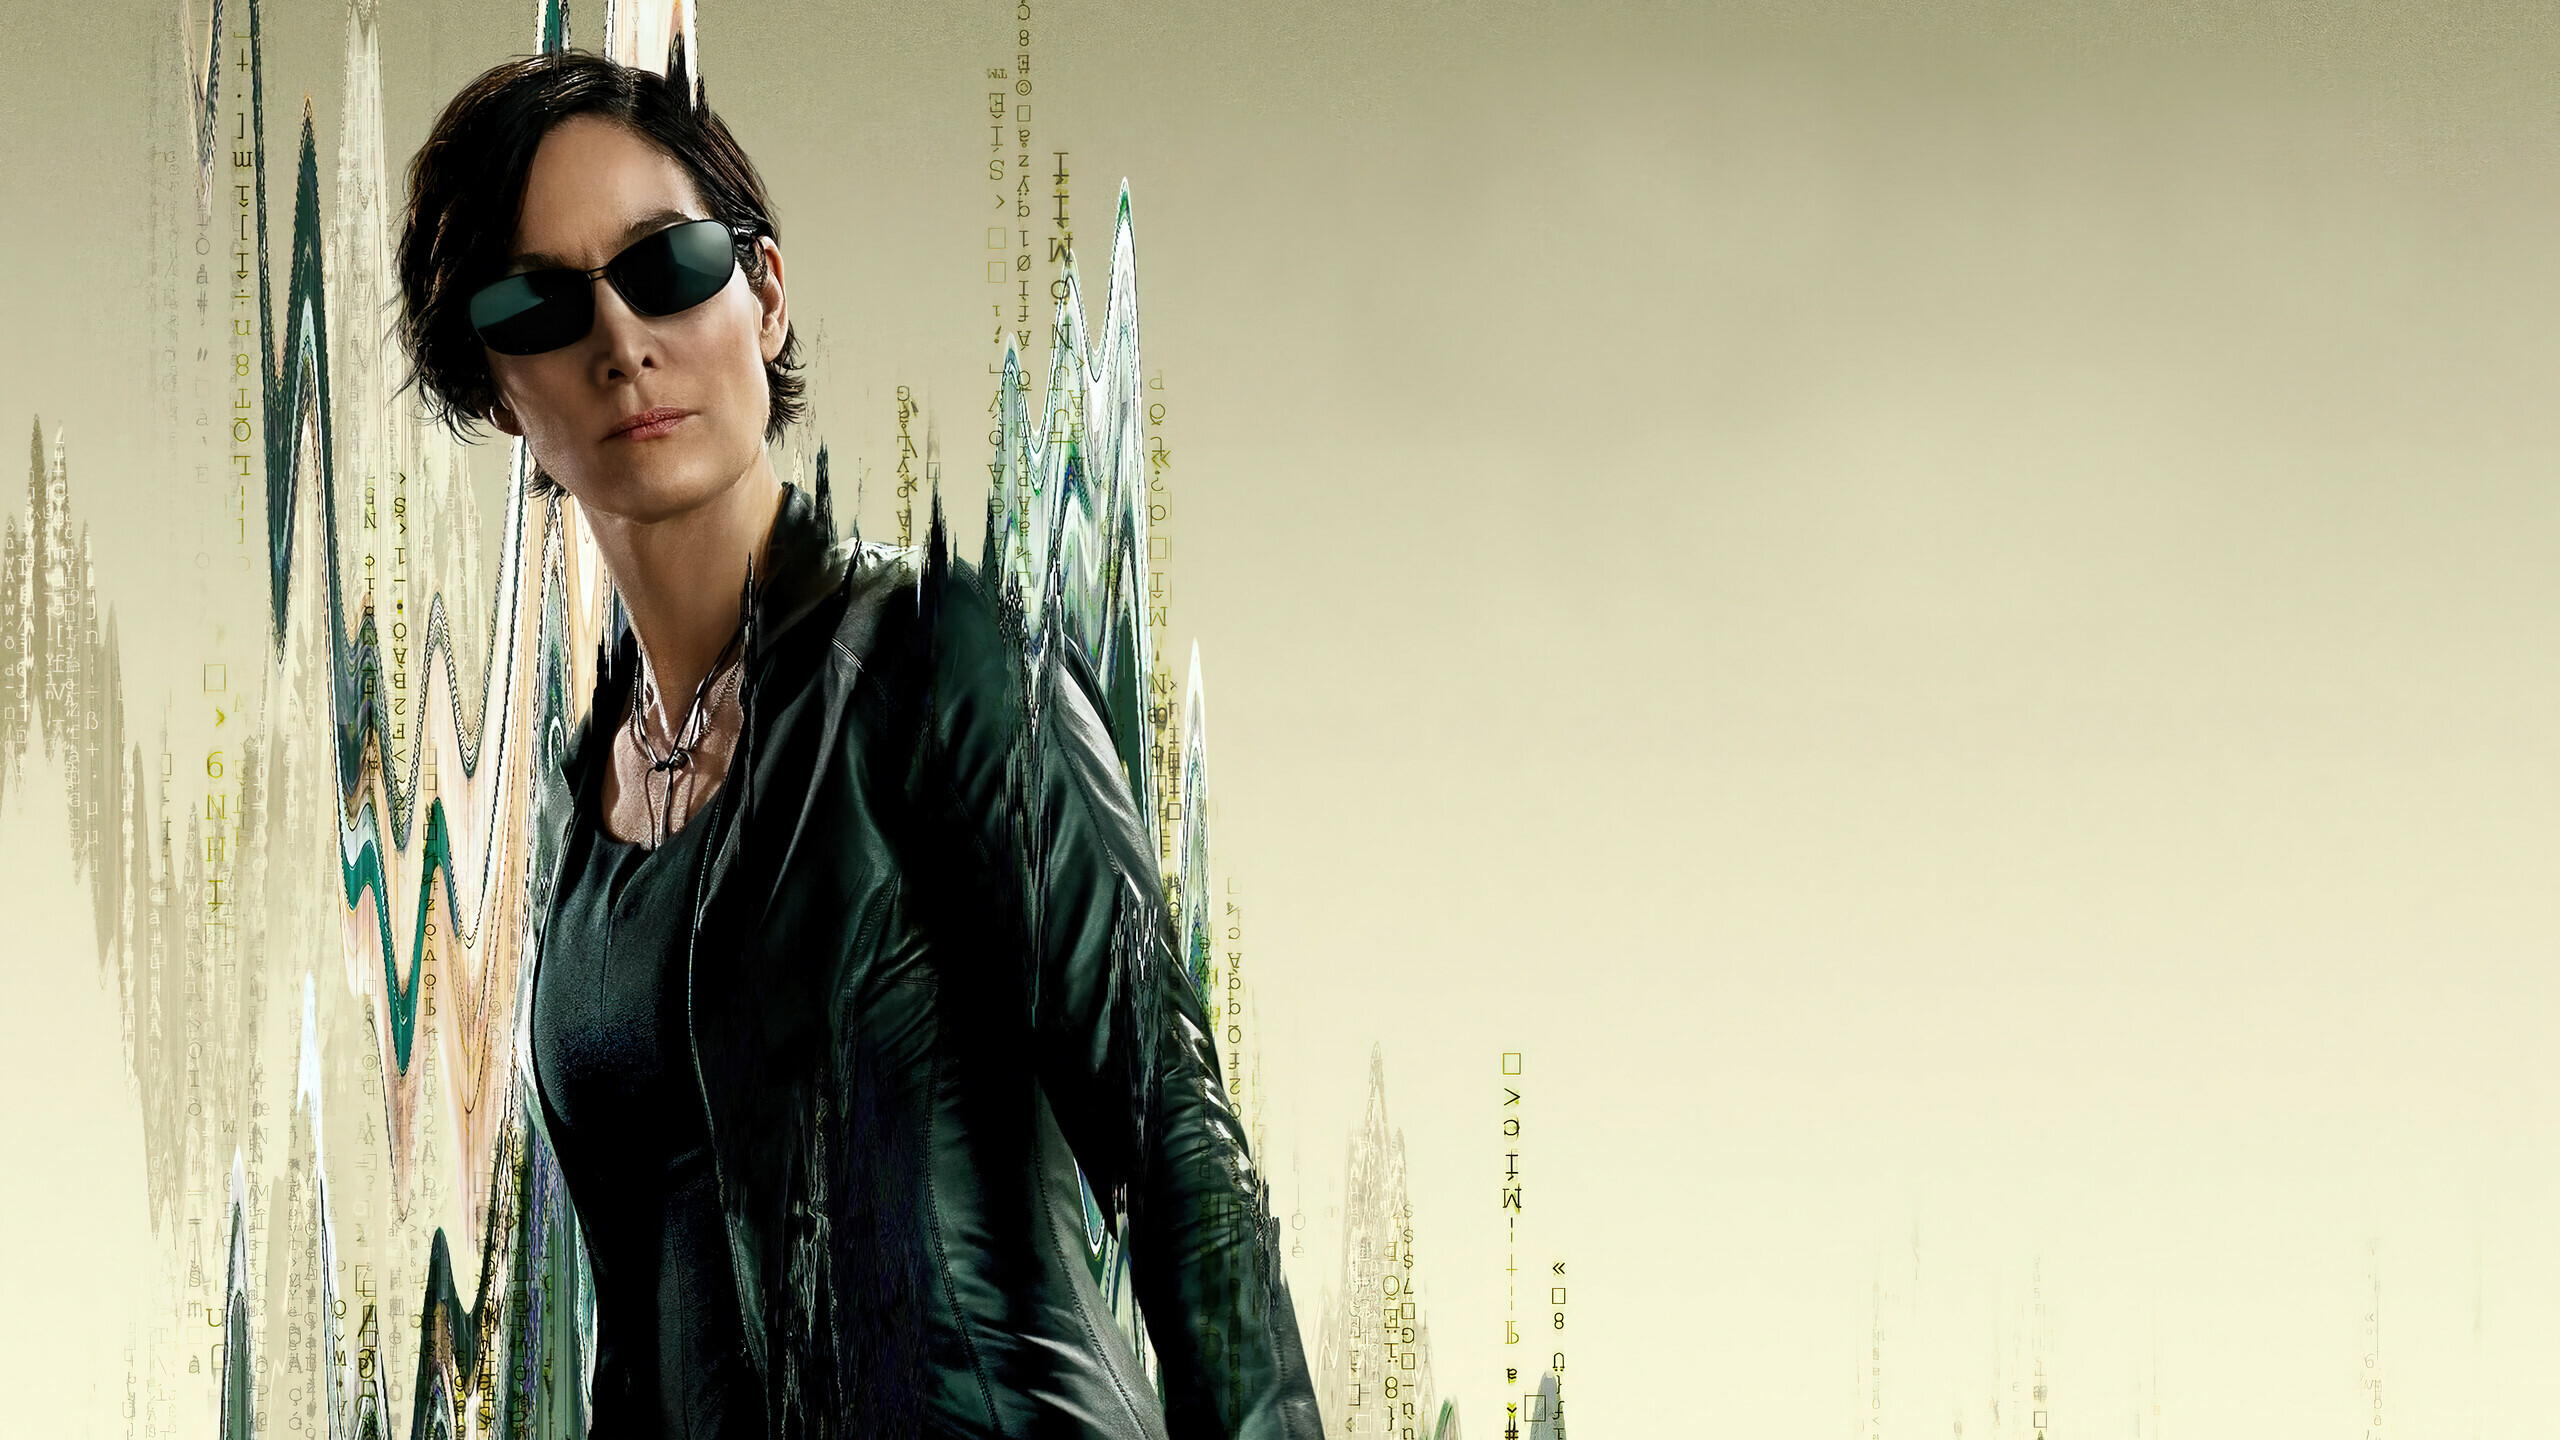 The Matrix Resurrections: Carrie-Anne Moss as Trinity and Tiffany, Neo's romantic interest. 2560x1440 HD Wallpaper.